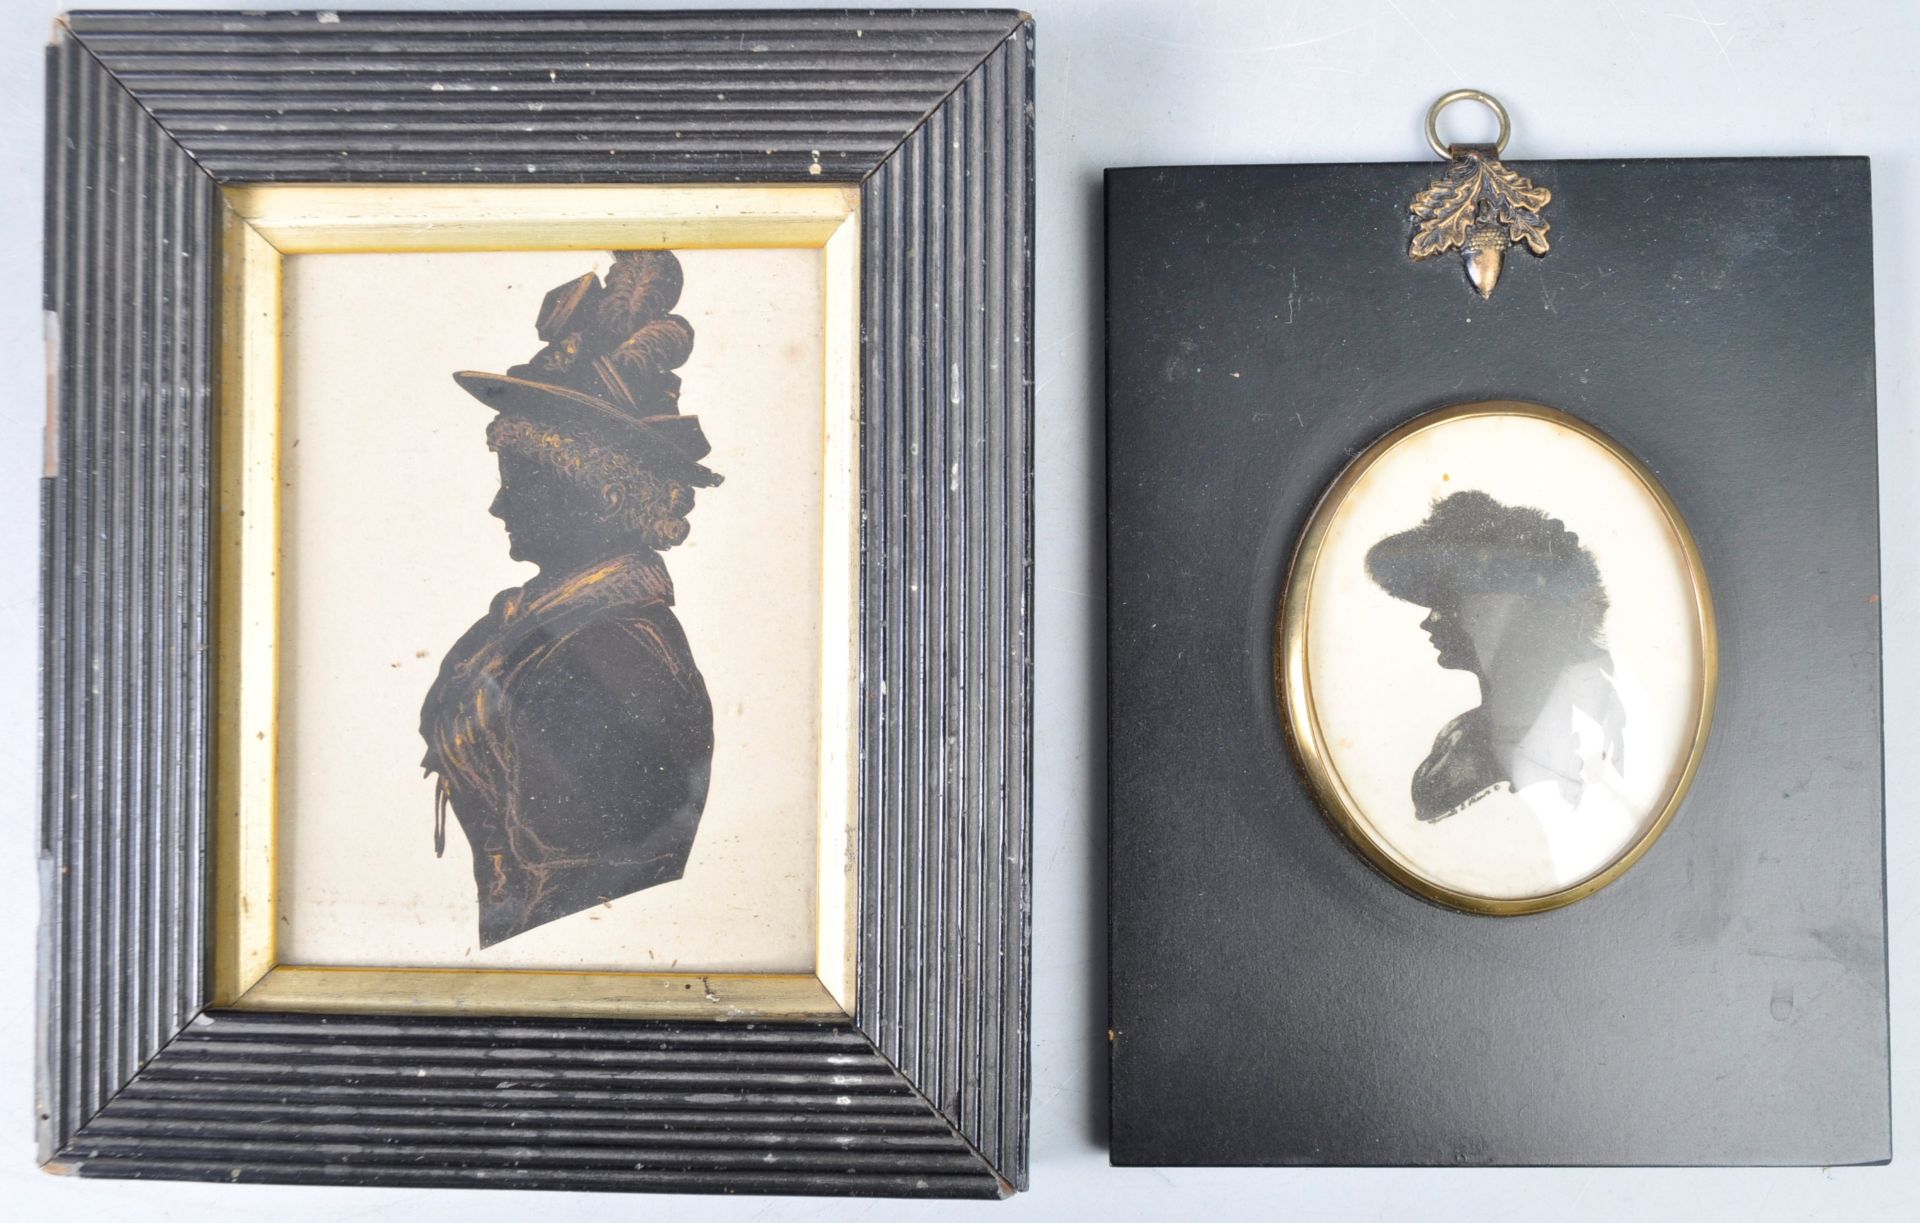 COLLECTION OF ENGLISH ANTIQUE PORTRAIT MINIATURES - Image 3 of 4